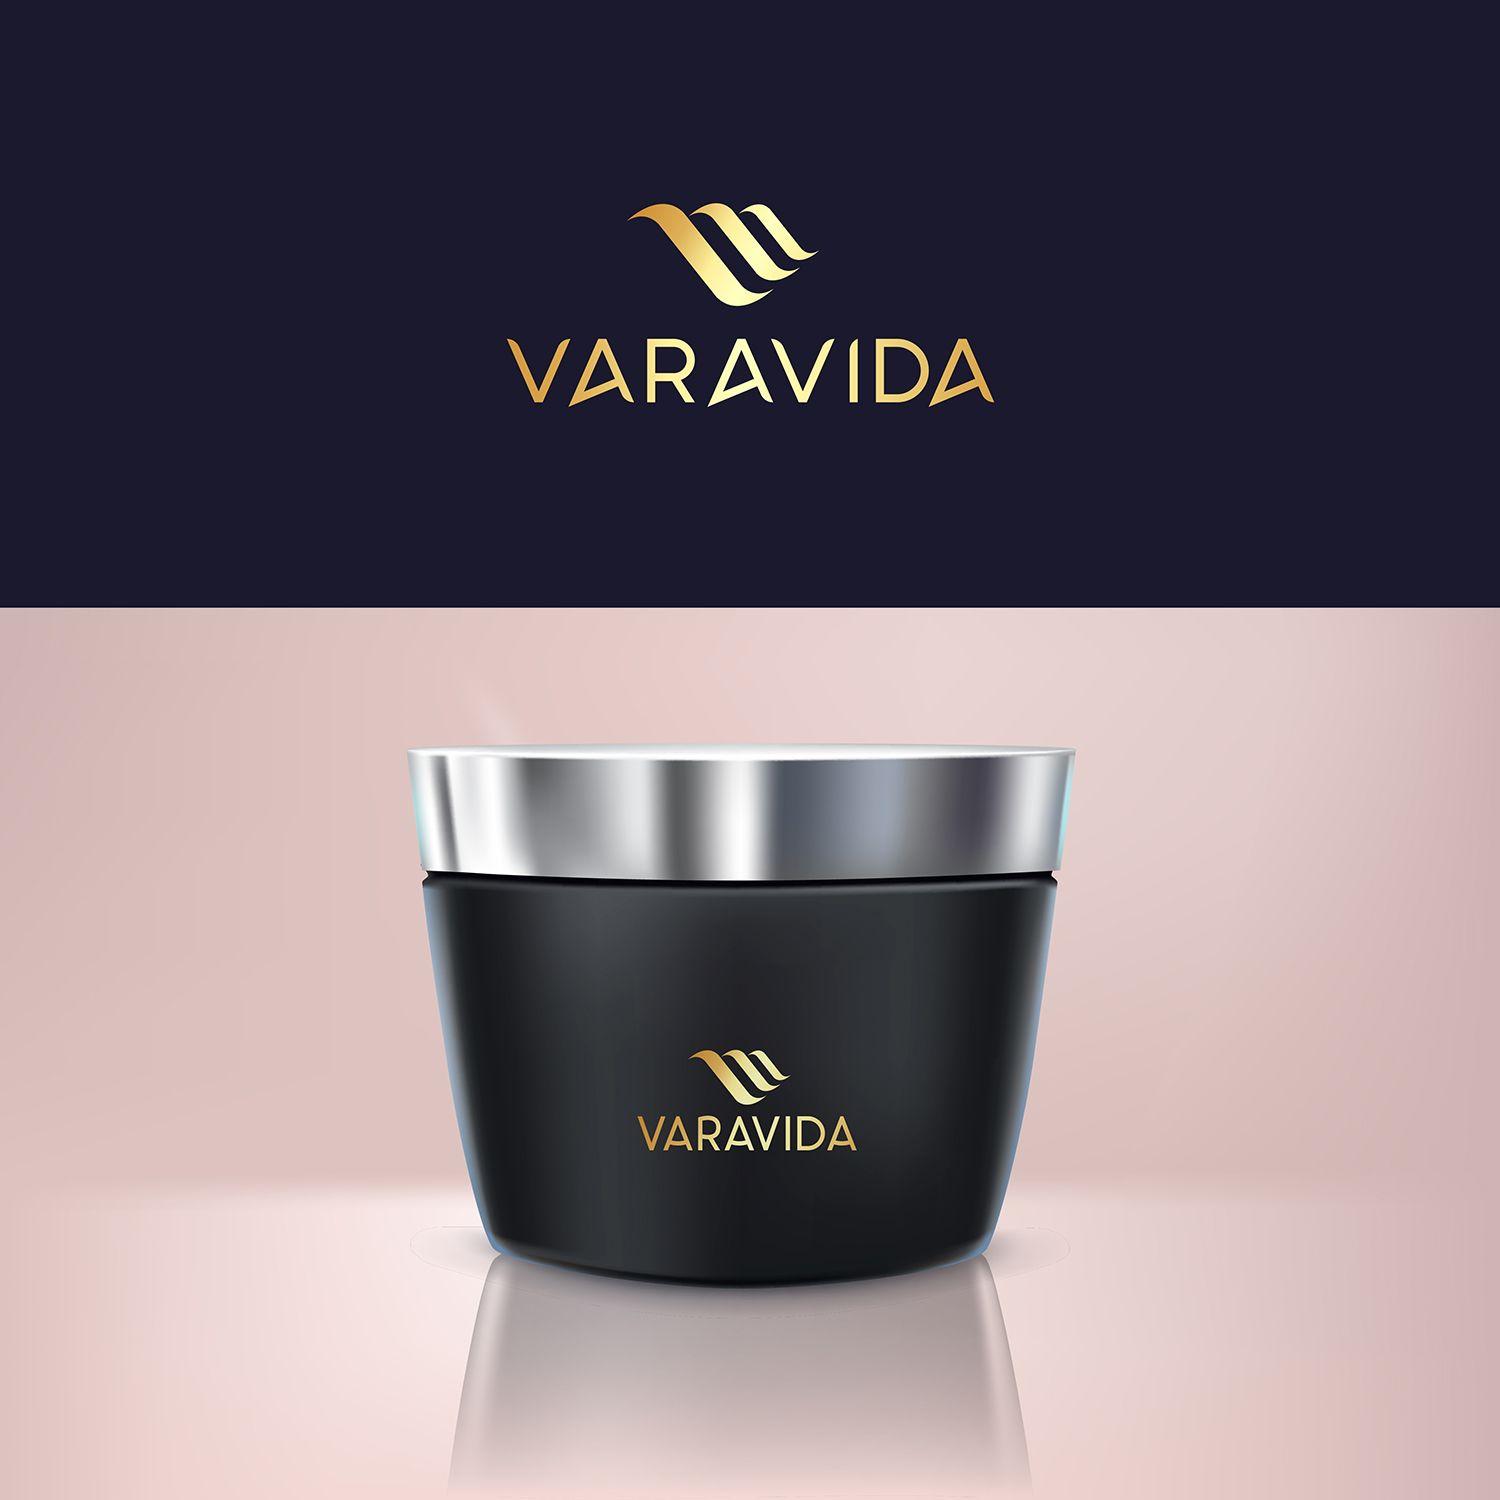 Personal Product Logo - Luxury Logo Ideas for Premium Products and Services